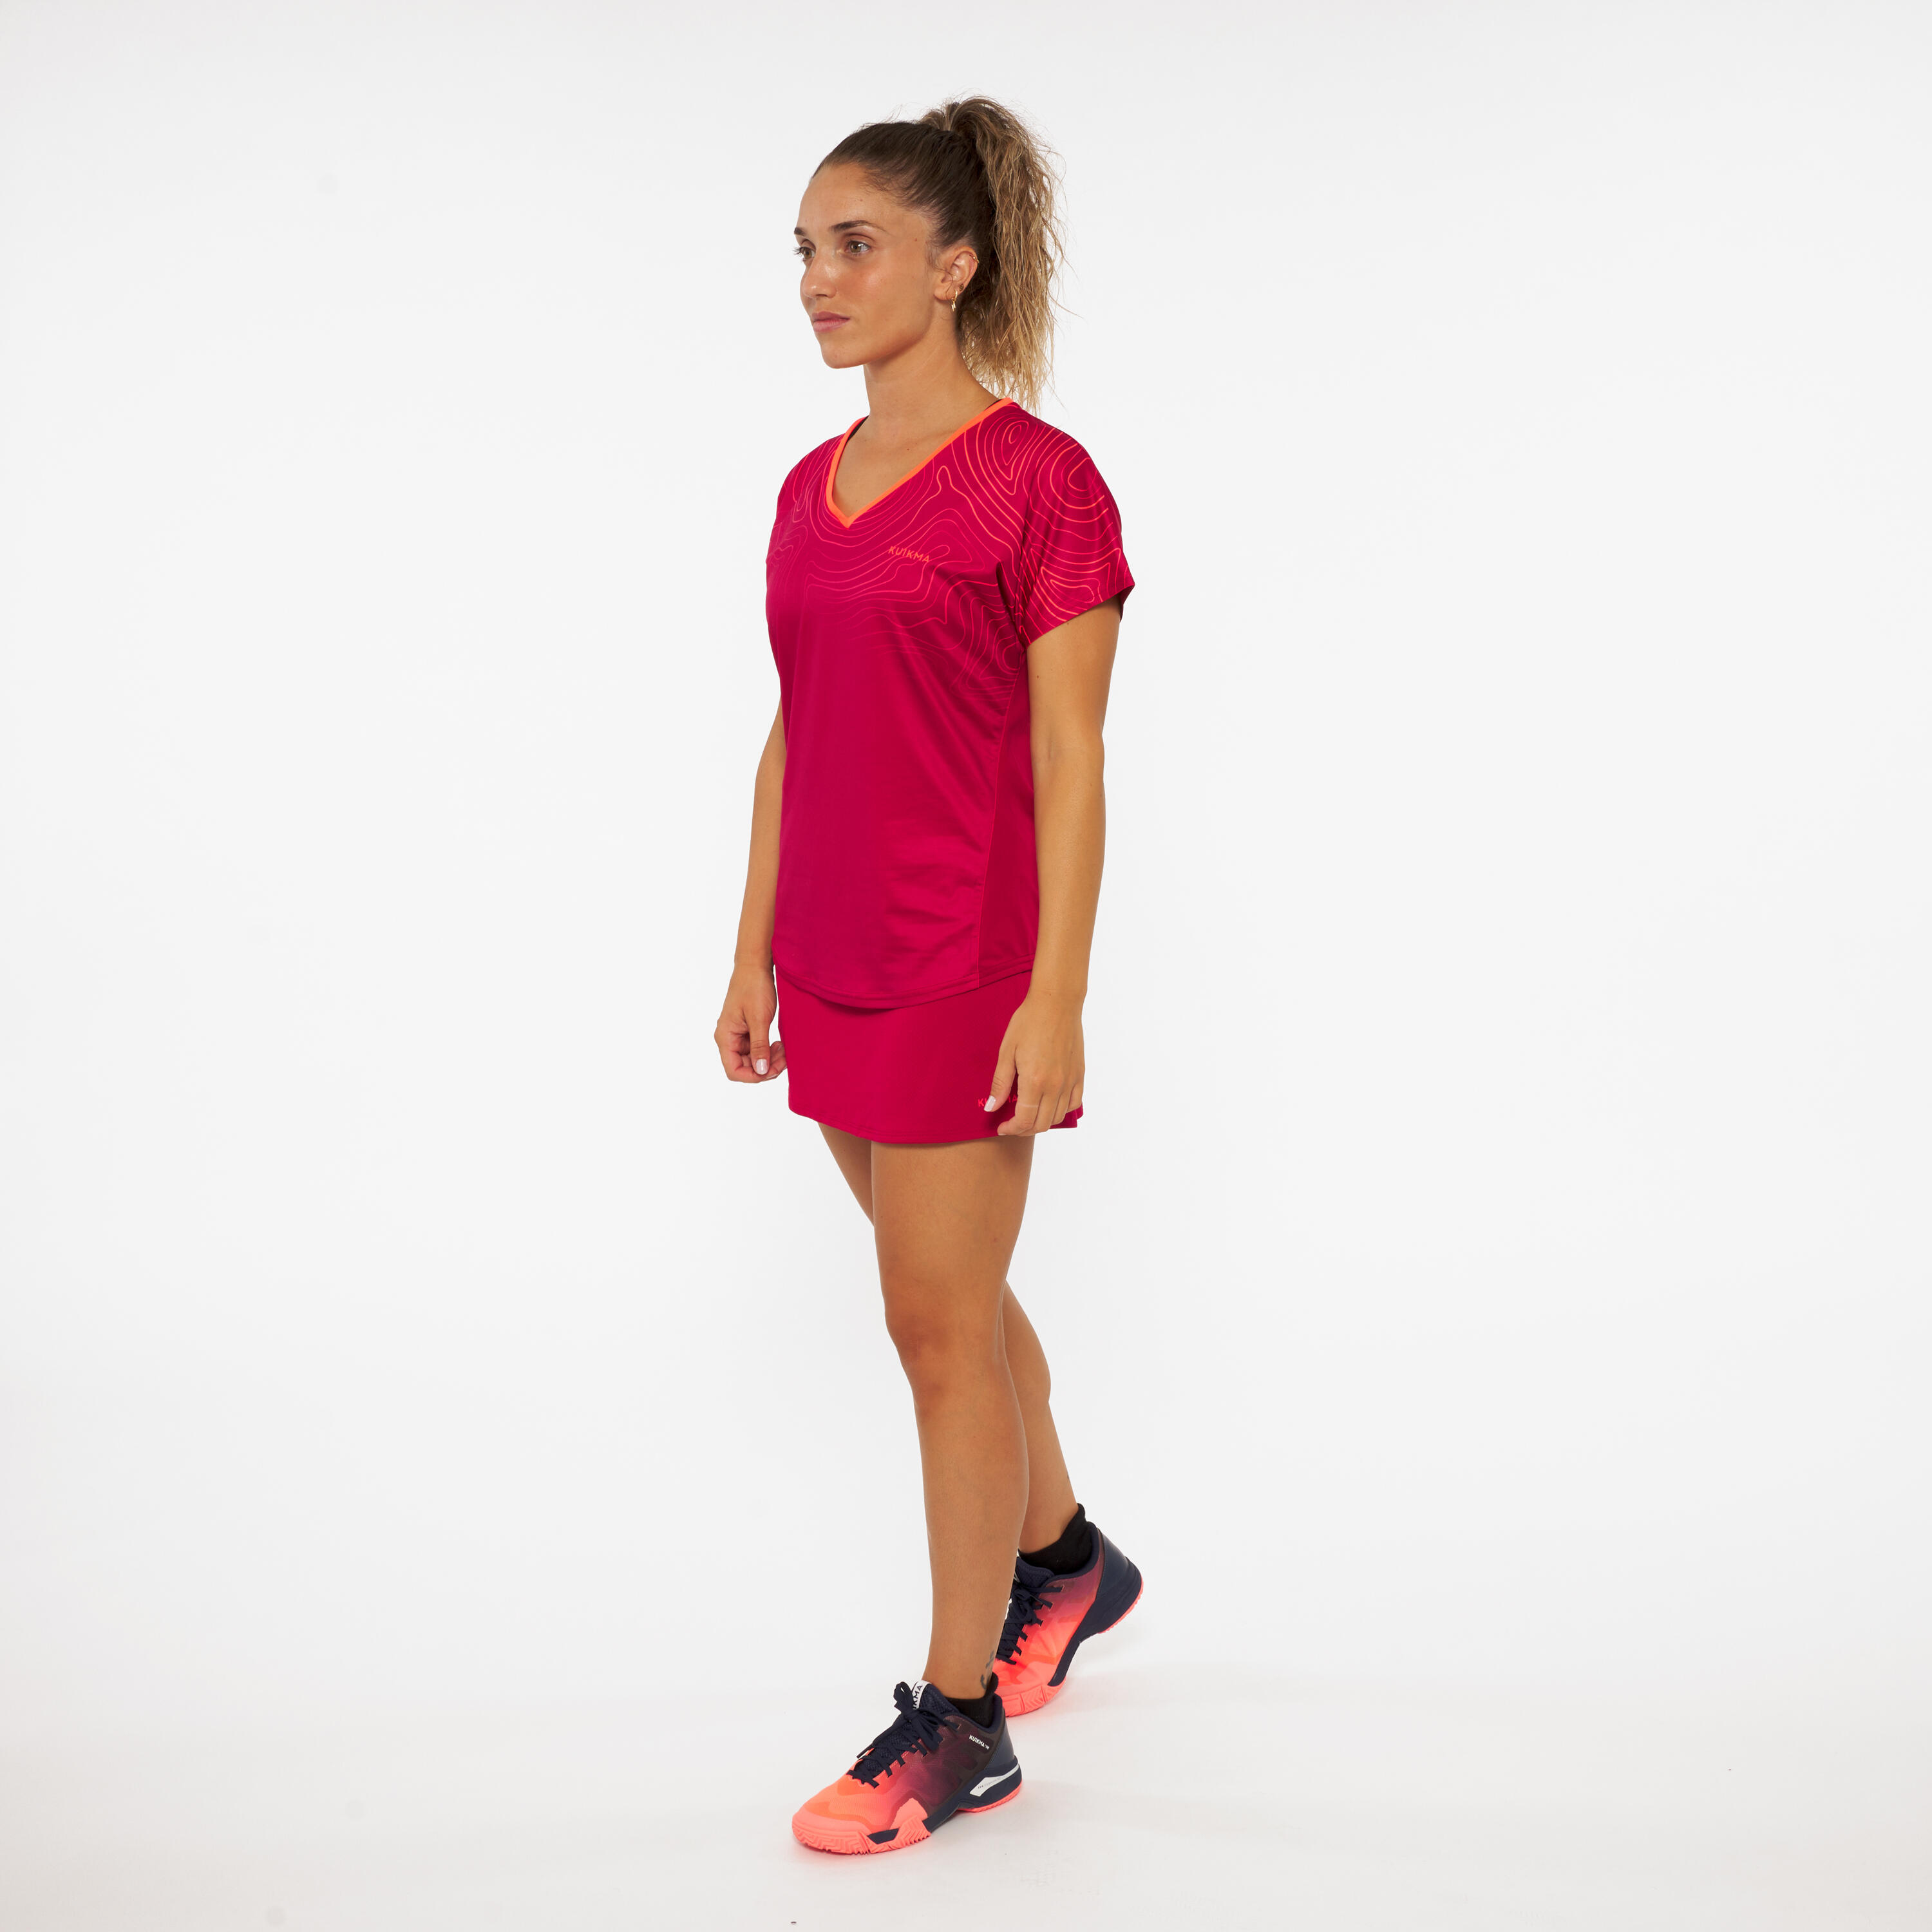 Women's Breathable Short-Sleeved Padel T-Shirt 500 - Red 7/7